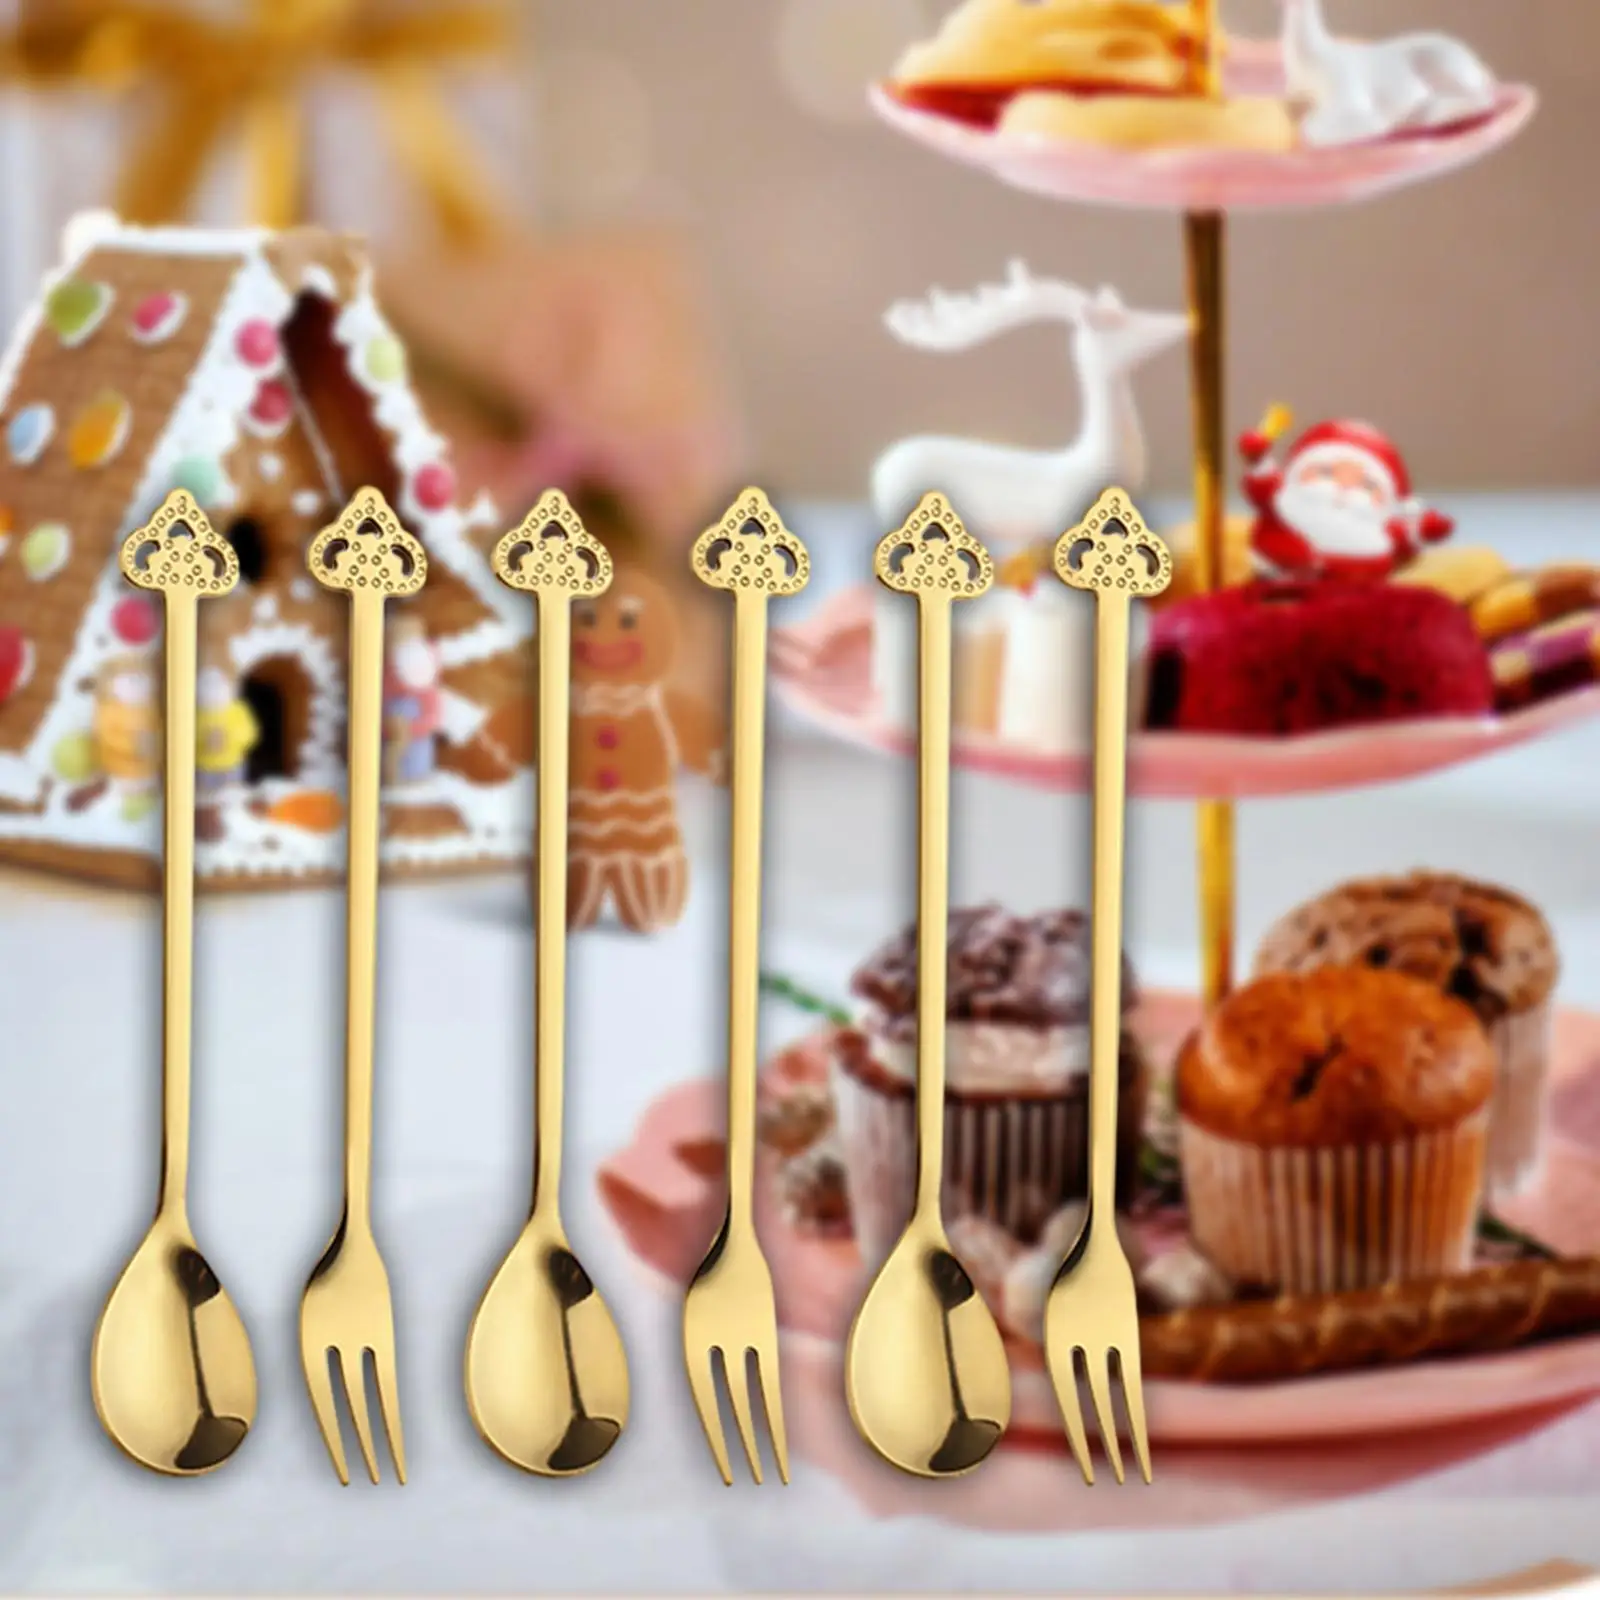 6Pcs Xmas Flatware Dessert Forks Coffee Stirring Spoon Stainless Steel Spoon Fork for Daily Use Restaurant Wedding Holiday